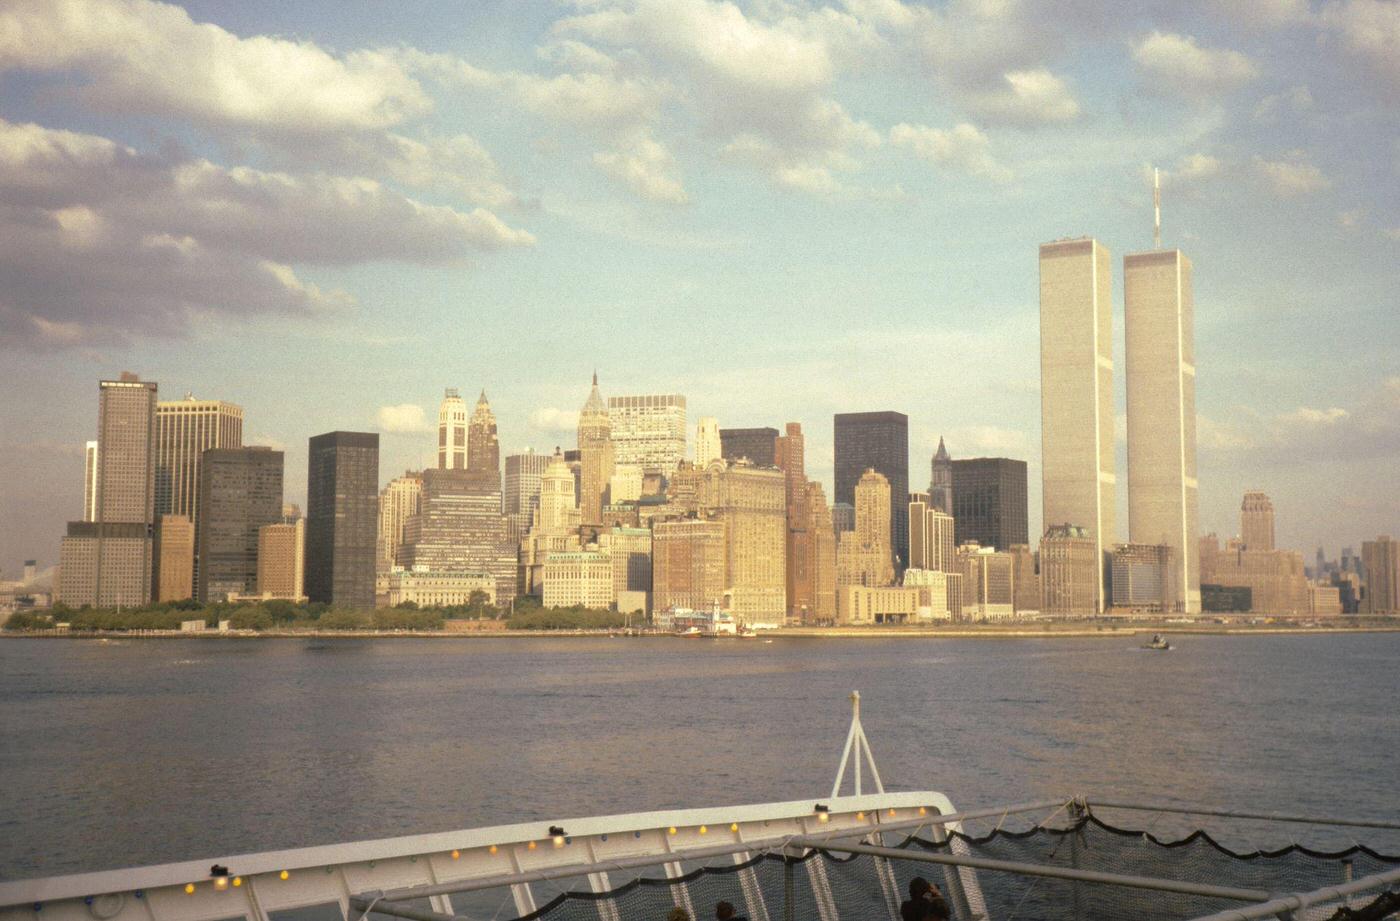 Twin Towers Of The World Trade Center, Viewed From The Aft Deck Of The Cunard Line'S Queen Elizabeth 2 Cruise Ship In Manhattan, 1975.